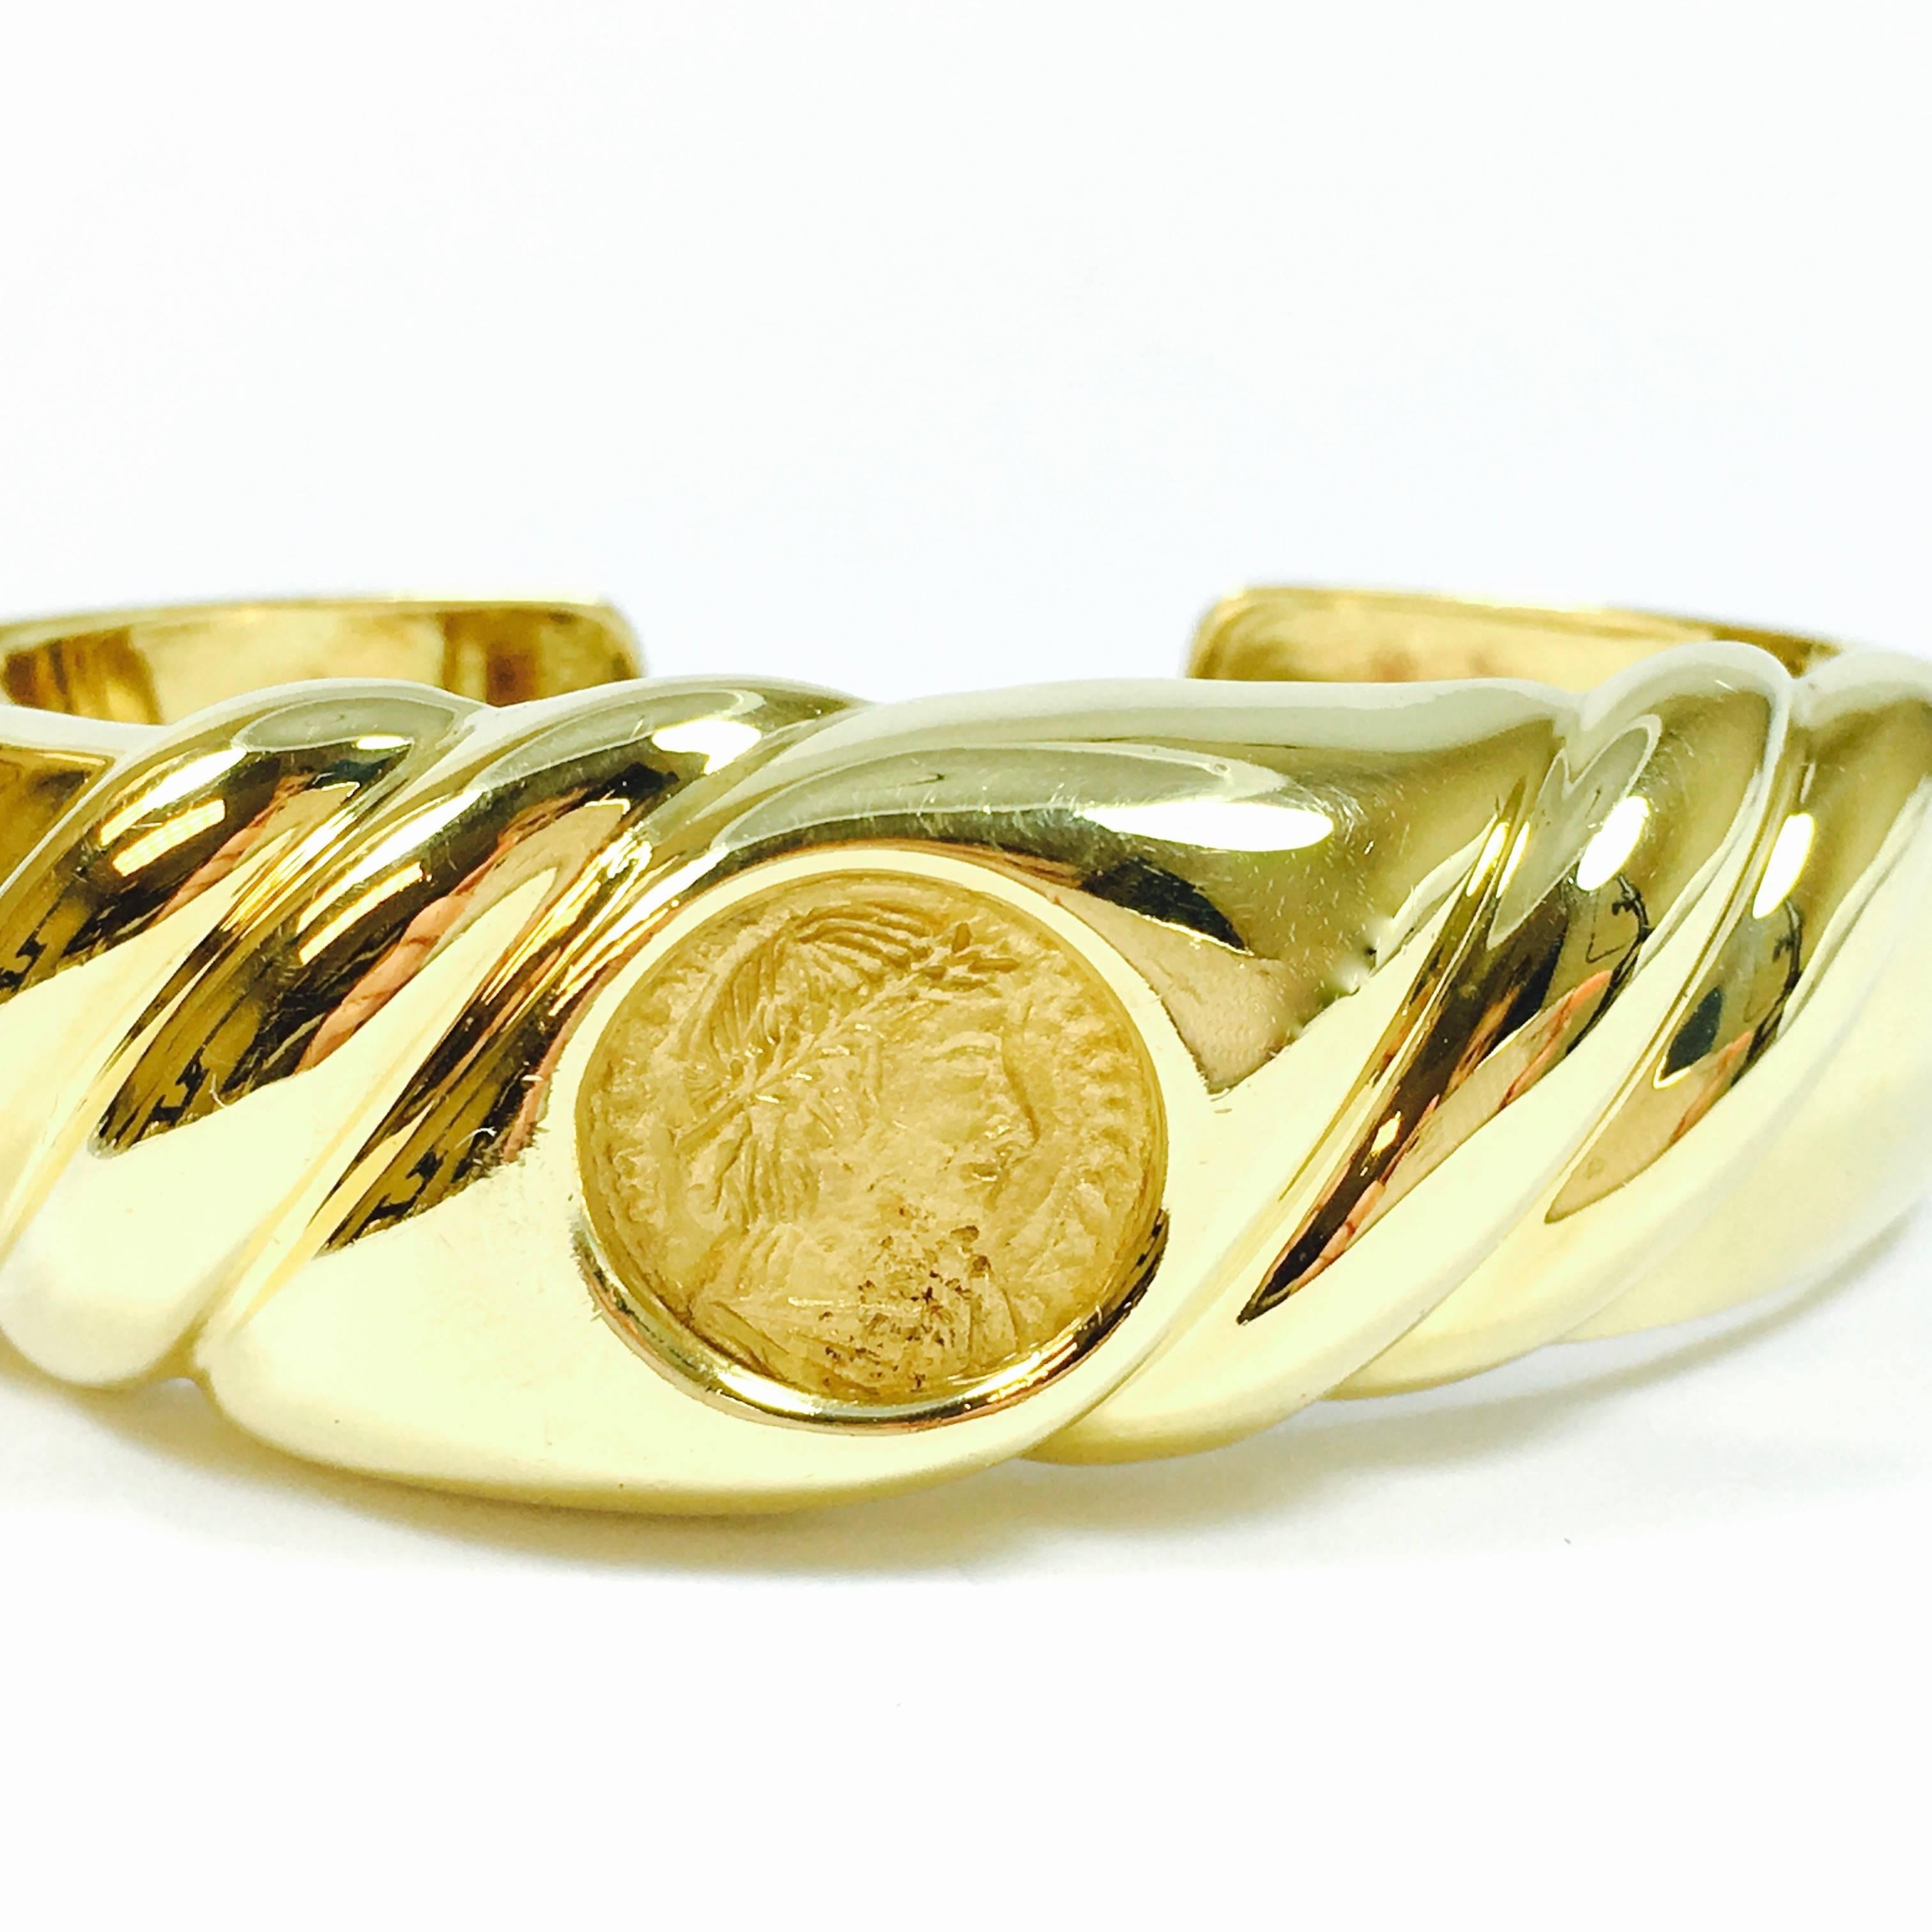 Heavy 18K yellow gold double hinged bangle bracelet, featuring a 14 mm round roman gold coin set in the center of the  21 mm wide front section, tapering down to 8 mm on the back. The bracelet opens up on both sides for easier access.
Fits up to a 6